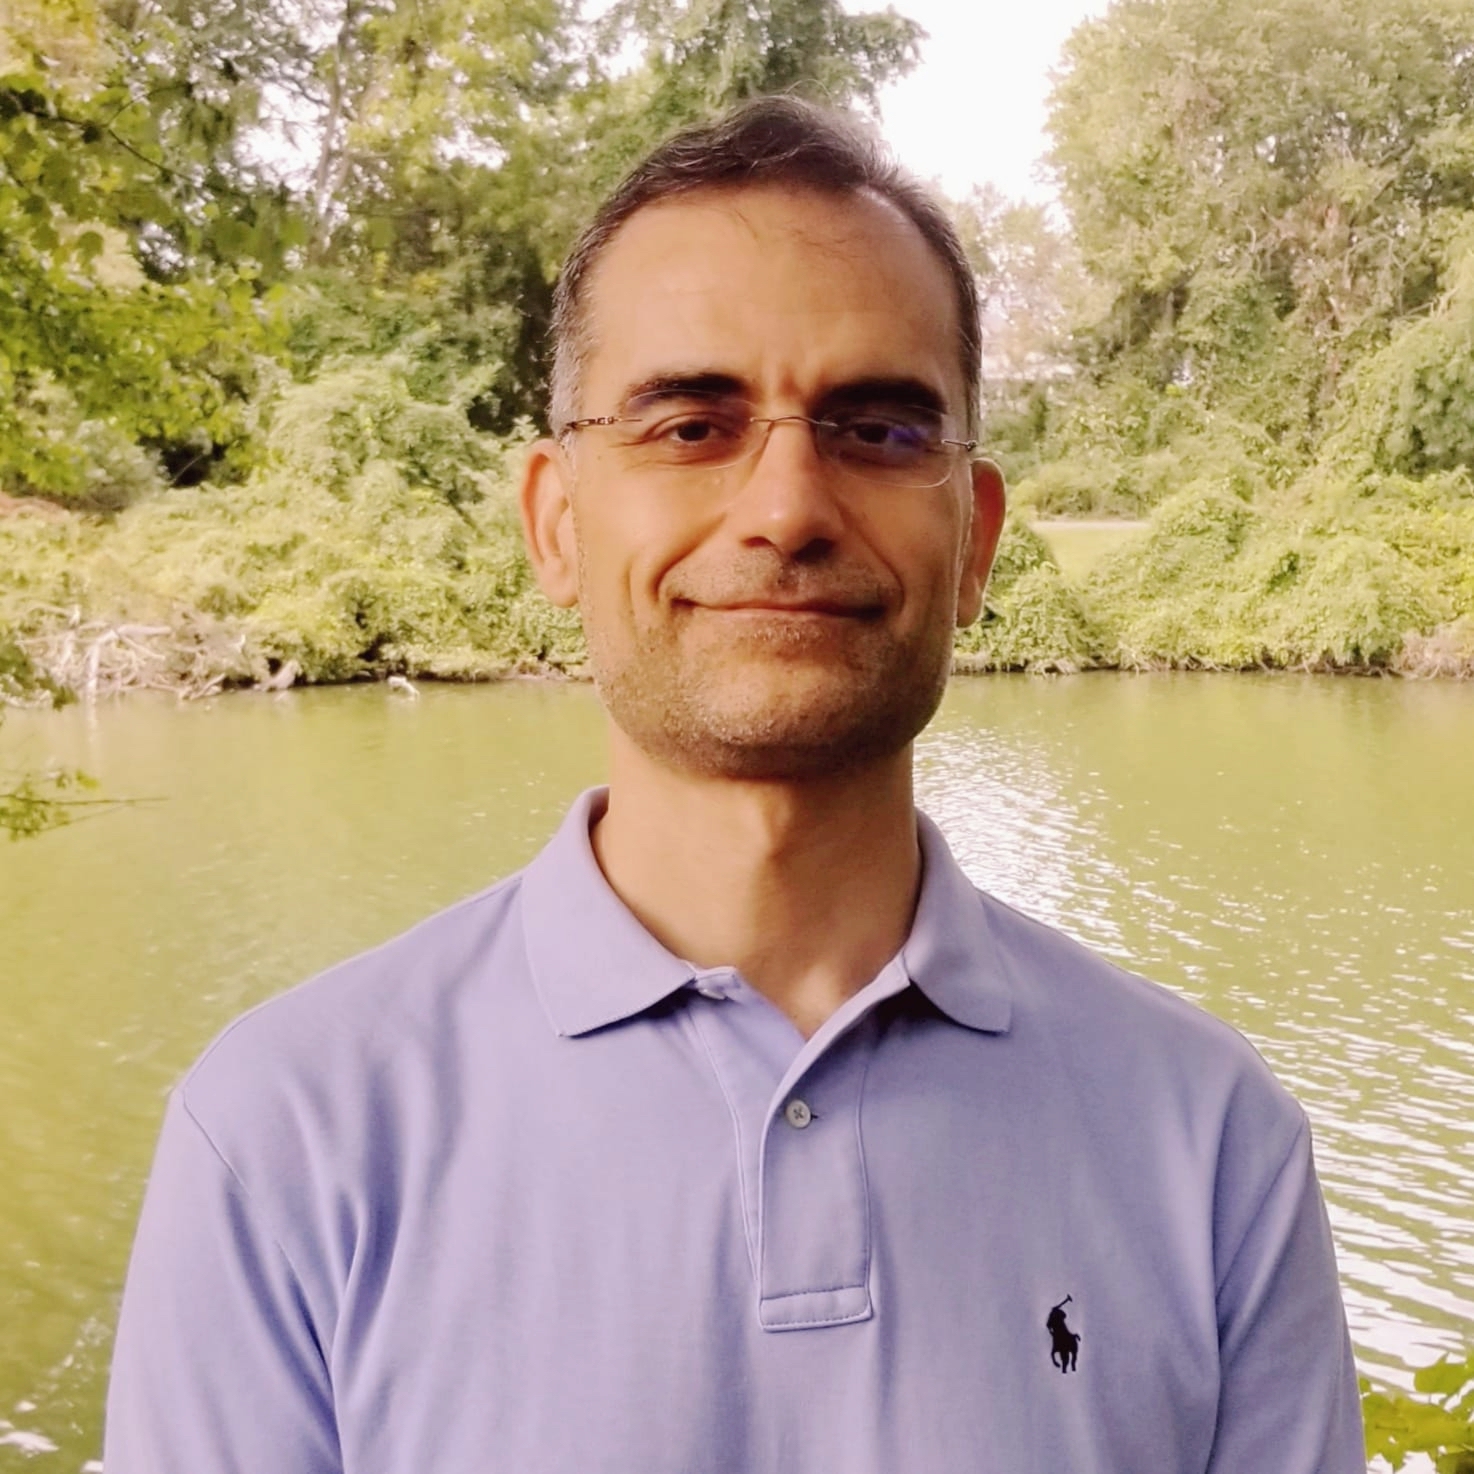 A headshot of Muath Obaidat, looking straight into the camera. He is standing in nature, with a lake and trees behind him, and wearing a purple polo shirt.